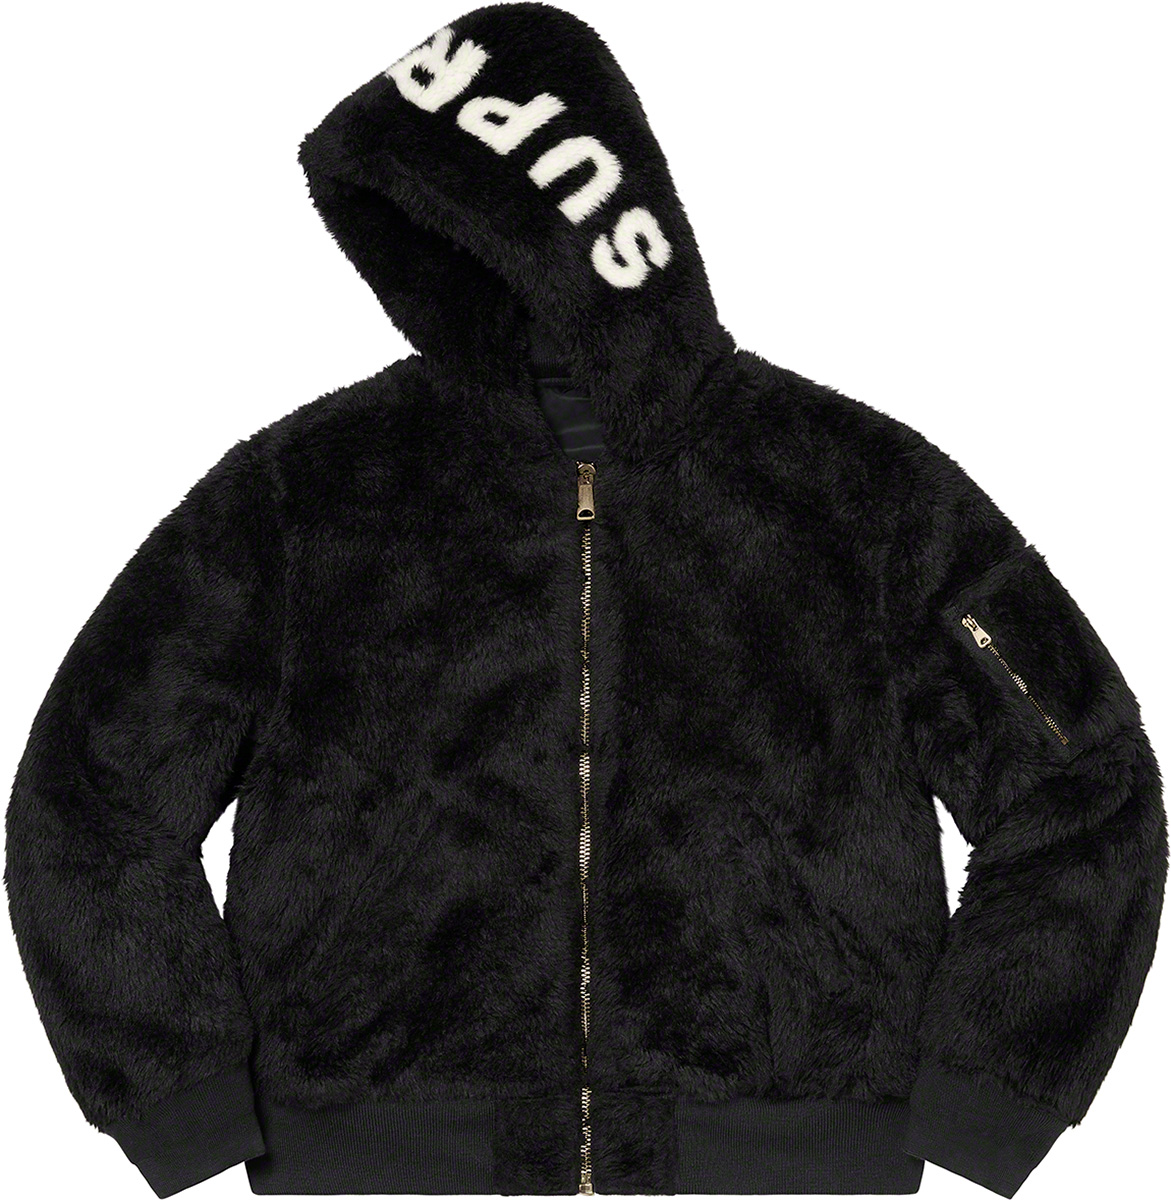 Water resistant nylon flight satin twill with fill and full zip closure. Snap flap hand pockets at lower front with utility pocket at sleeve. Embroidered logo on chest. Faux fur reverse side with welt hand pockets at lower front and utility pocket at sleeve. Faux fur jacquard logo at hood. Made by Alpha Industries exclusively for Supreme.